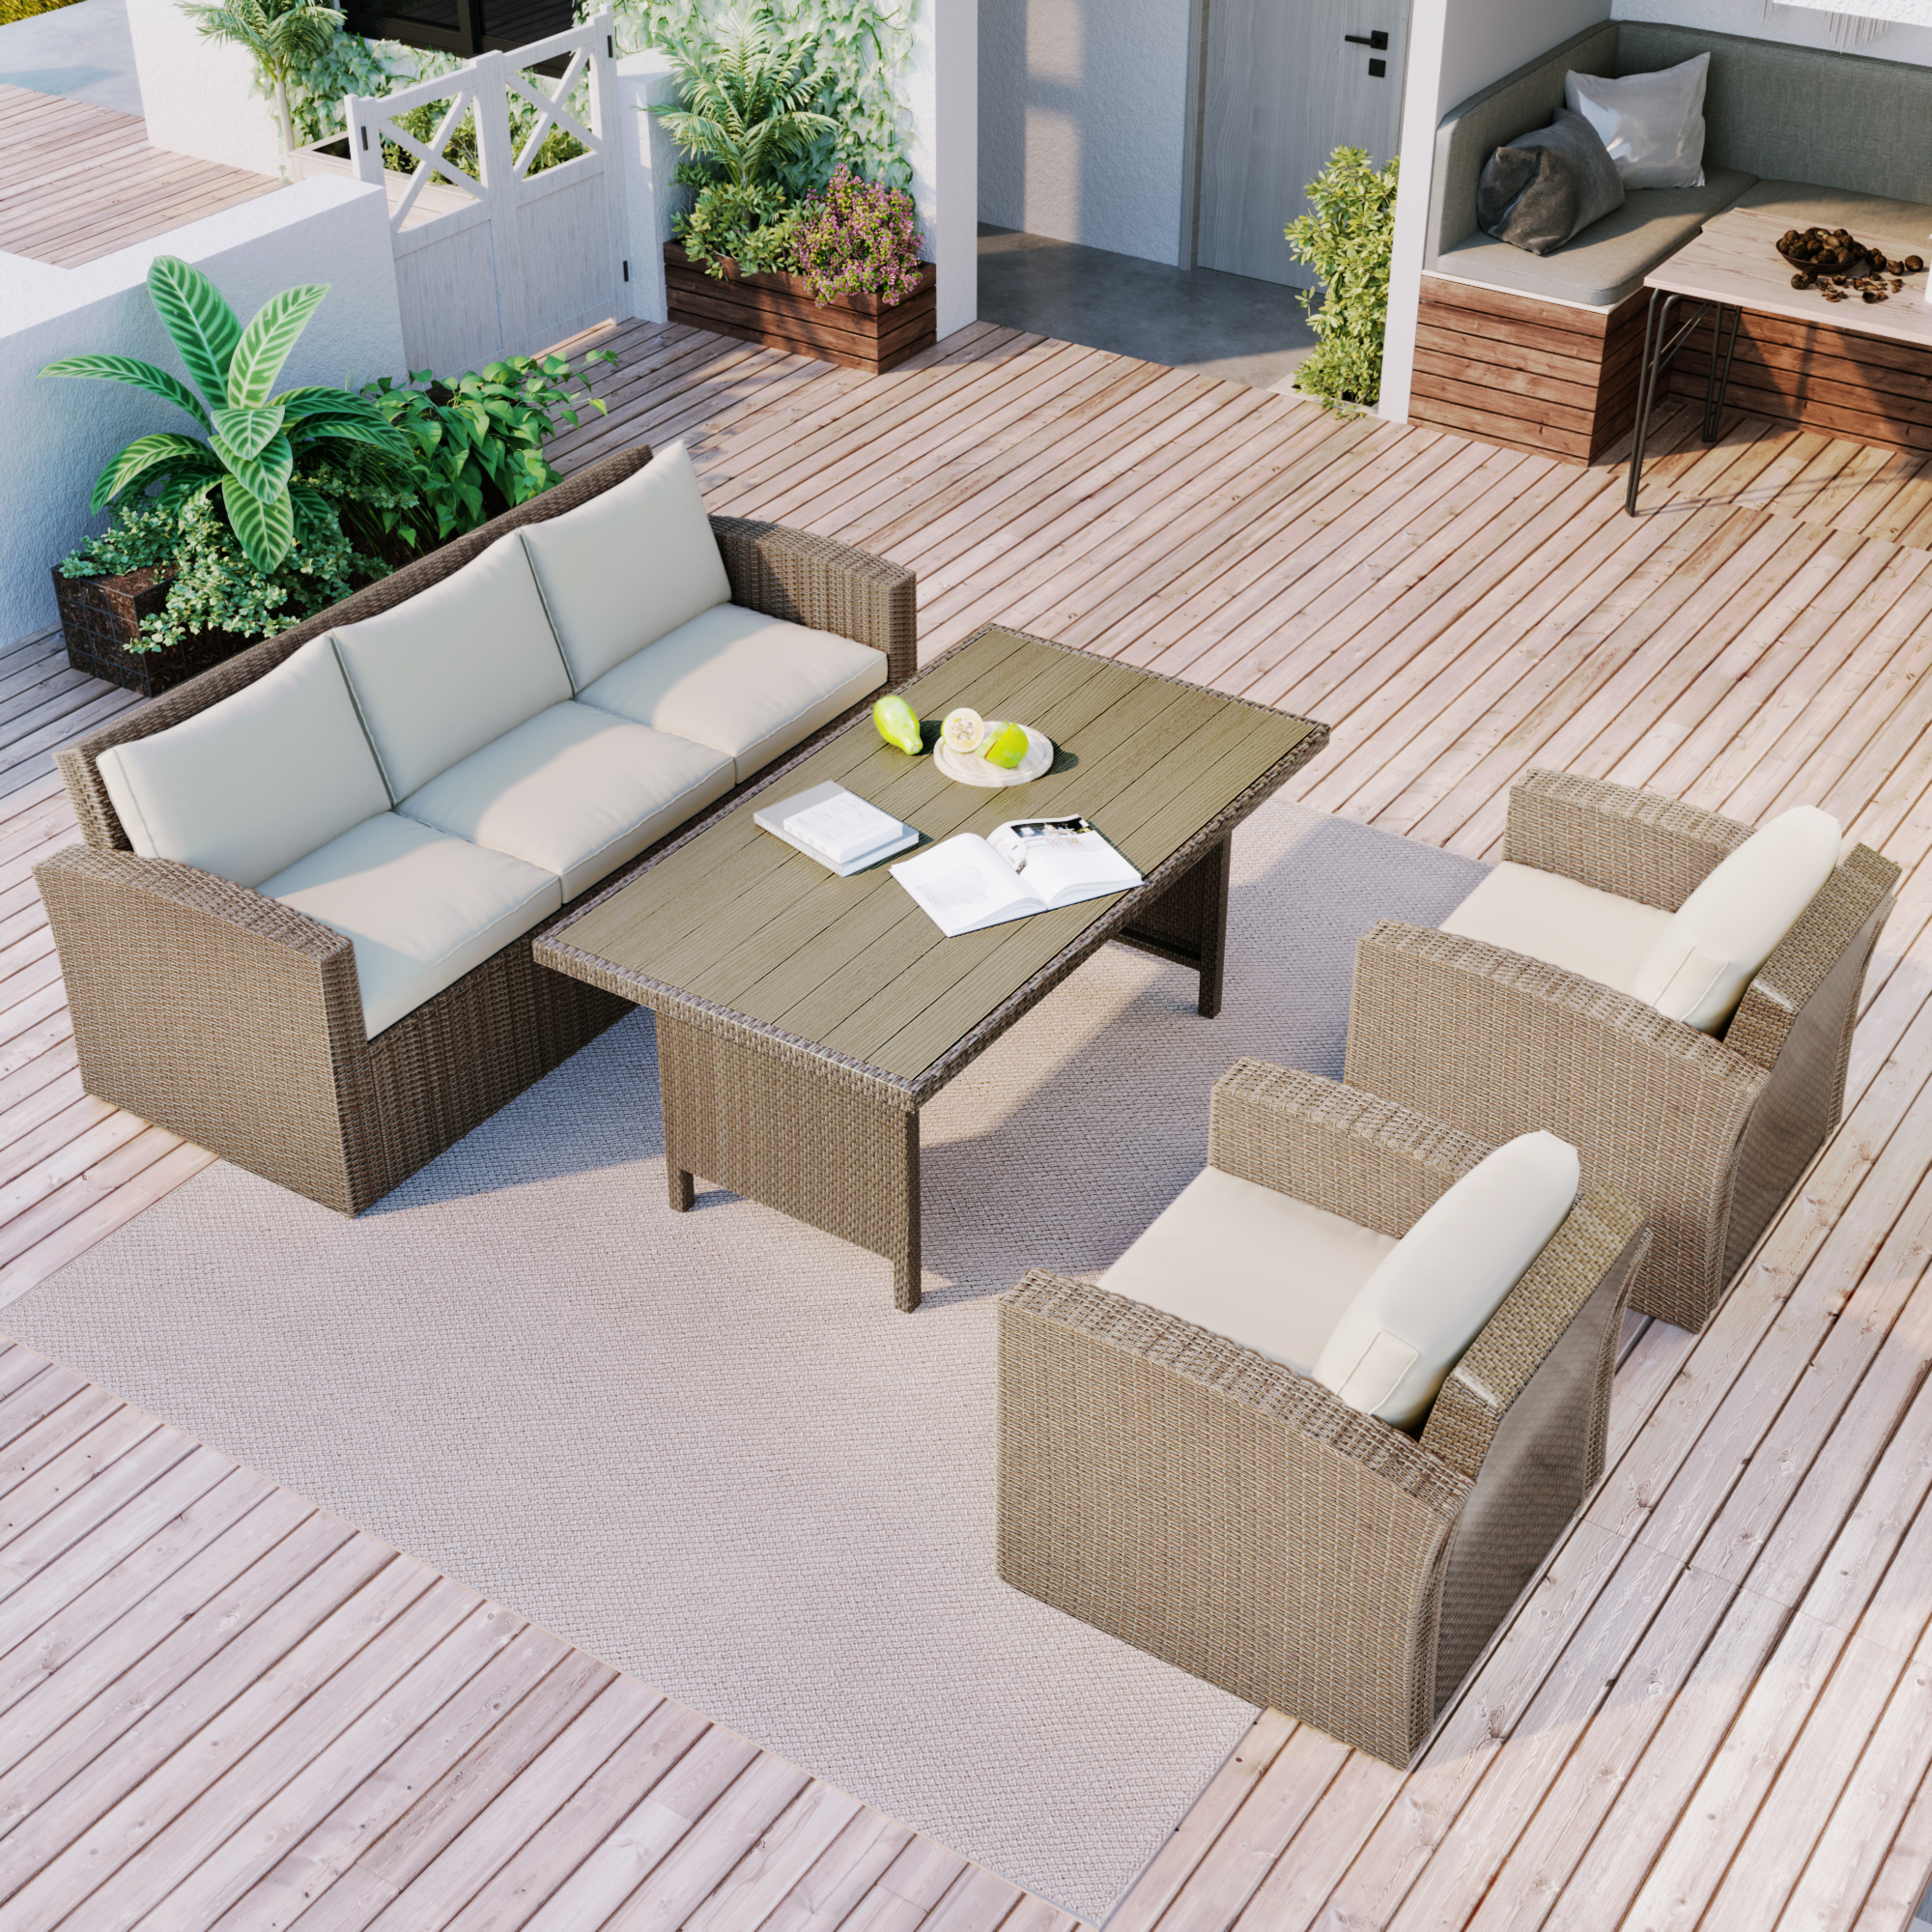 Andoer Outdoor Patio Furniture Set 4-Piece, Conversation Set Wicker Furniture Sofa Set with Beige Cushions - image 1 of 7